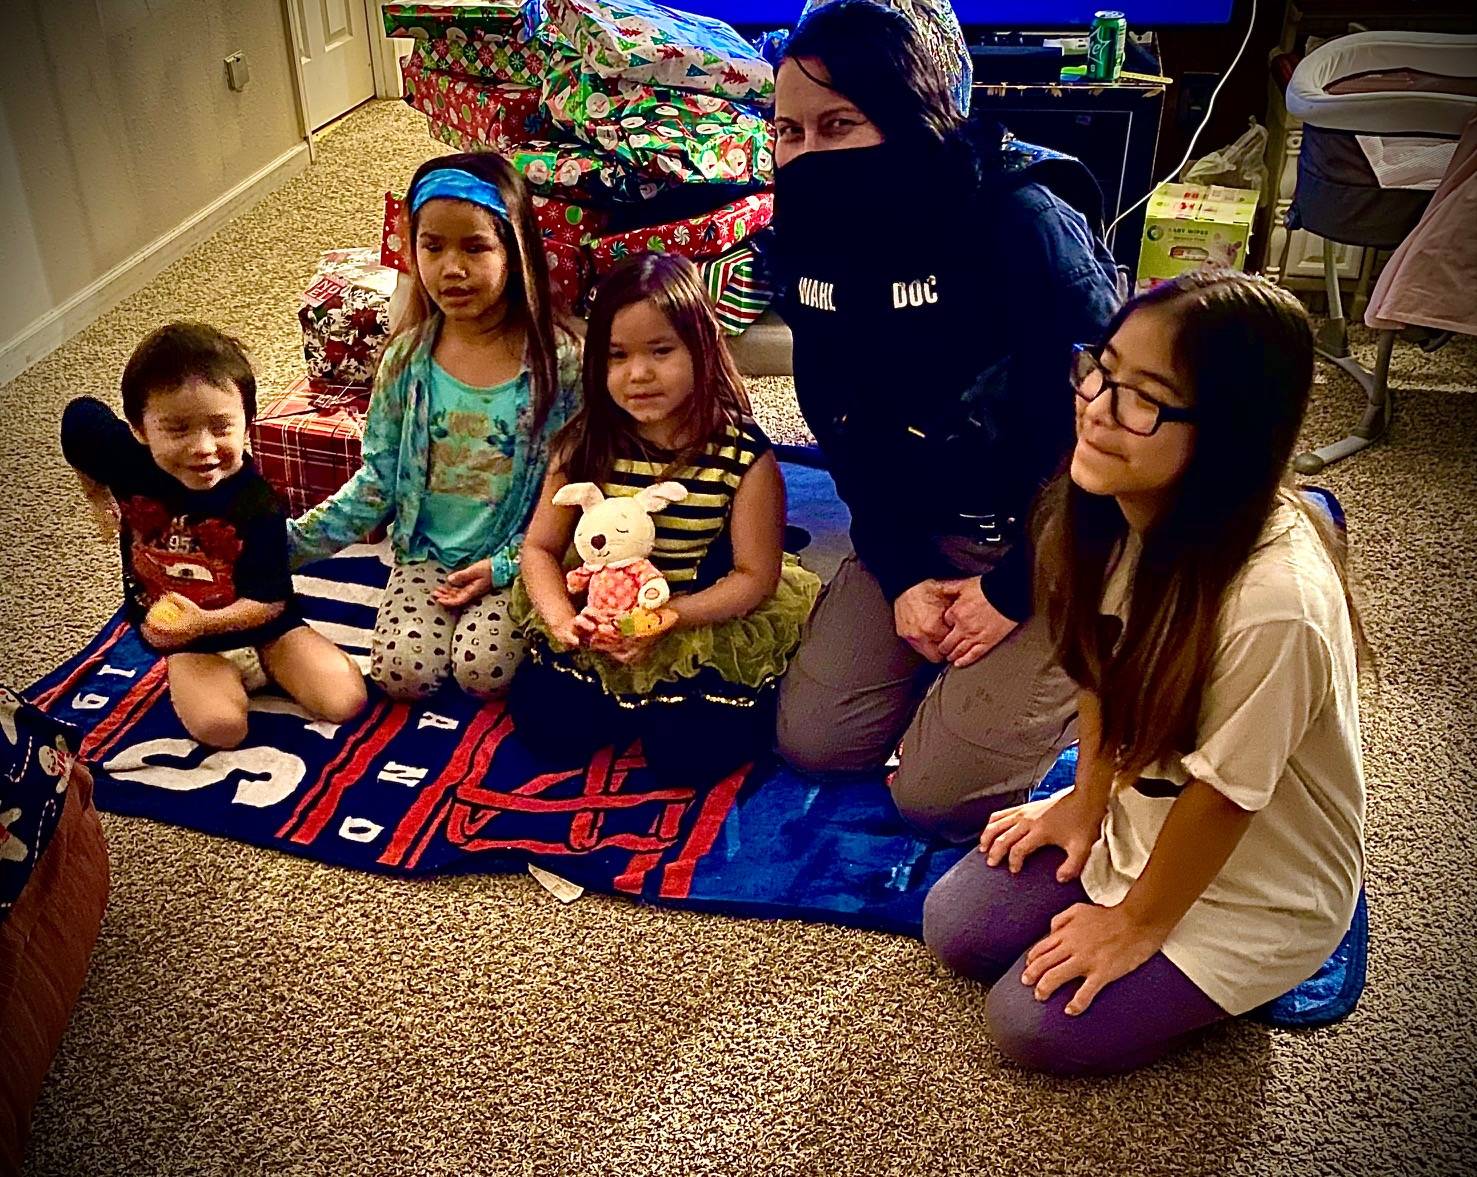 Courtesy photo / APOA
Pretrial Enforcement Officer Linda Wahl delivers presents to and Donald, Sandra, Alice, and Kaylanna as part of the Alaska Police Officer’s Association annual “Shop with a Cop” event.